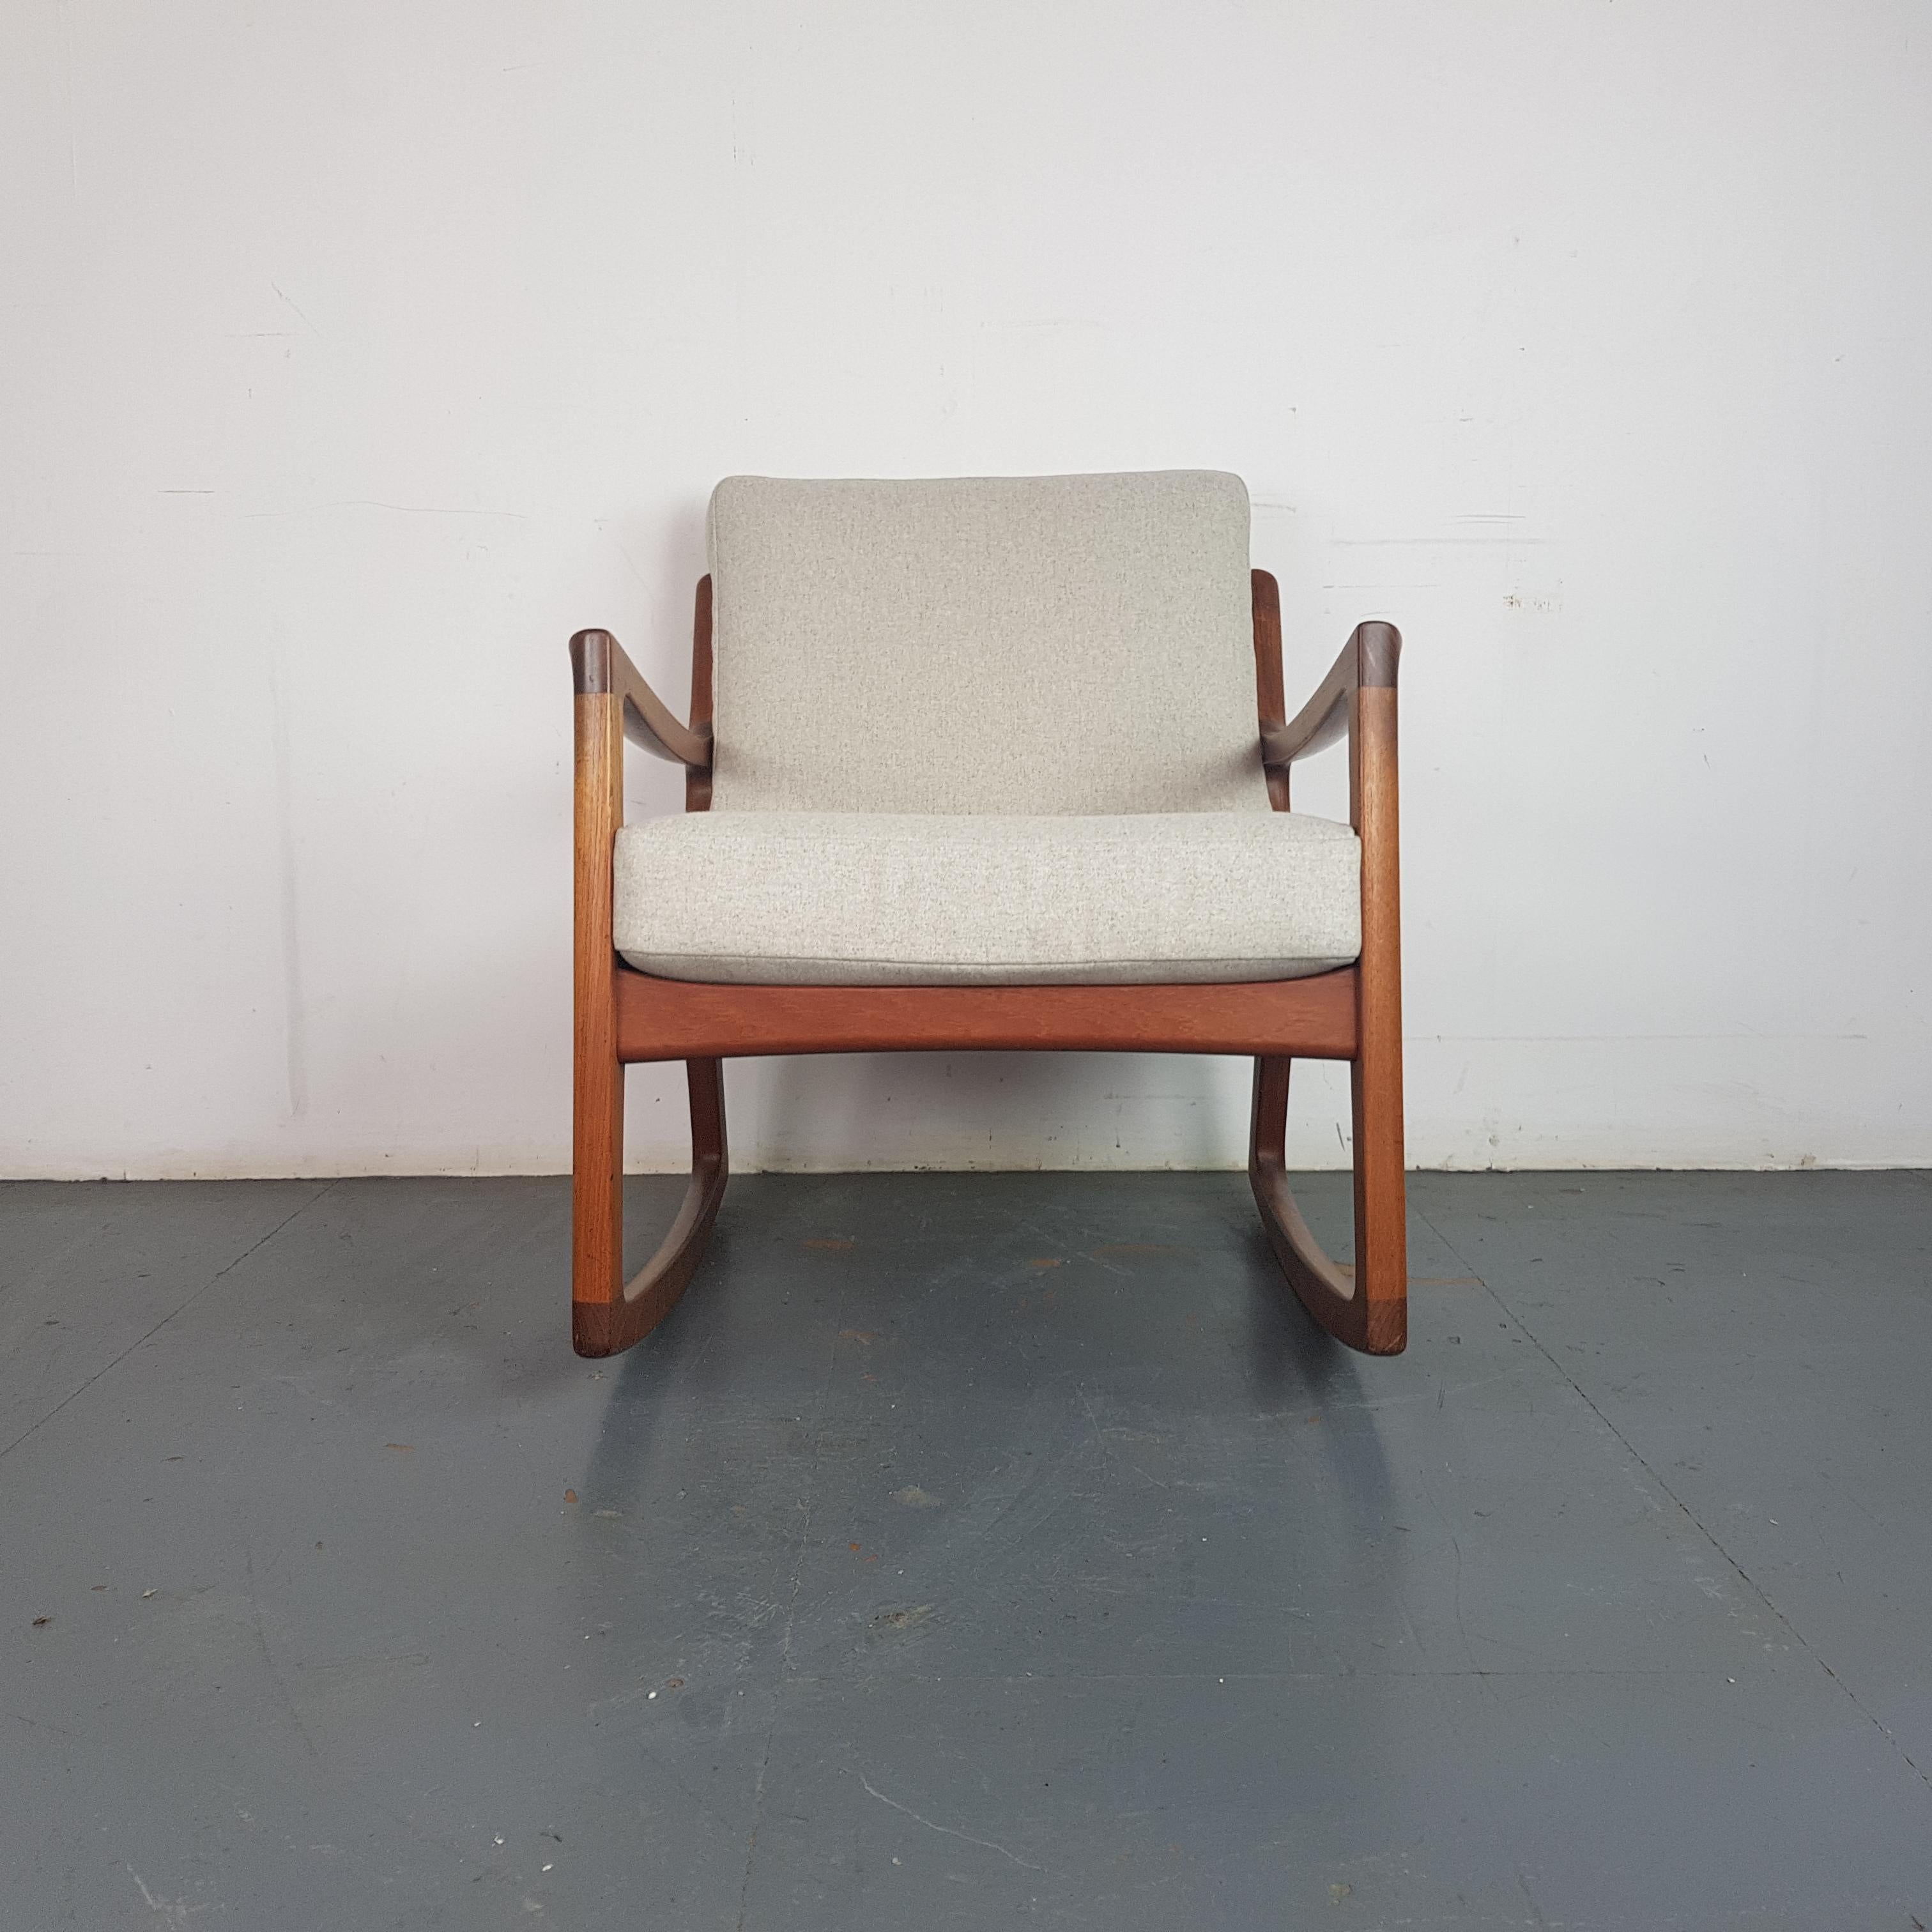 Ole Wanscher, 1960s Teak Rocking Chair Made by France and Son, Denmark 1